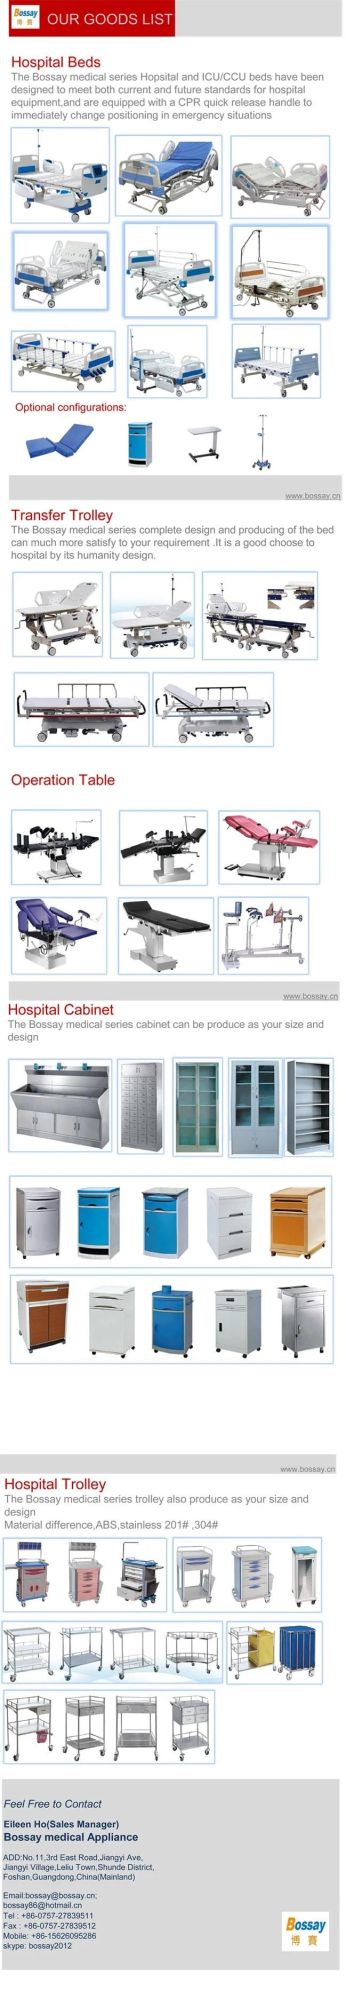 BS-818 One Function Manual Hospital Bed (medical equipment, hospital furniture)